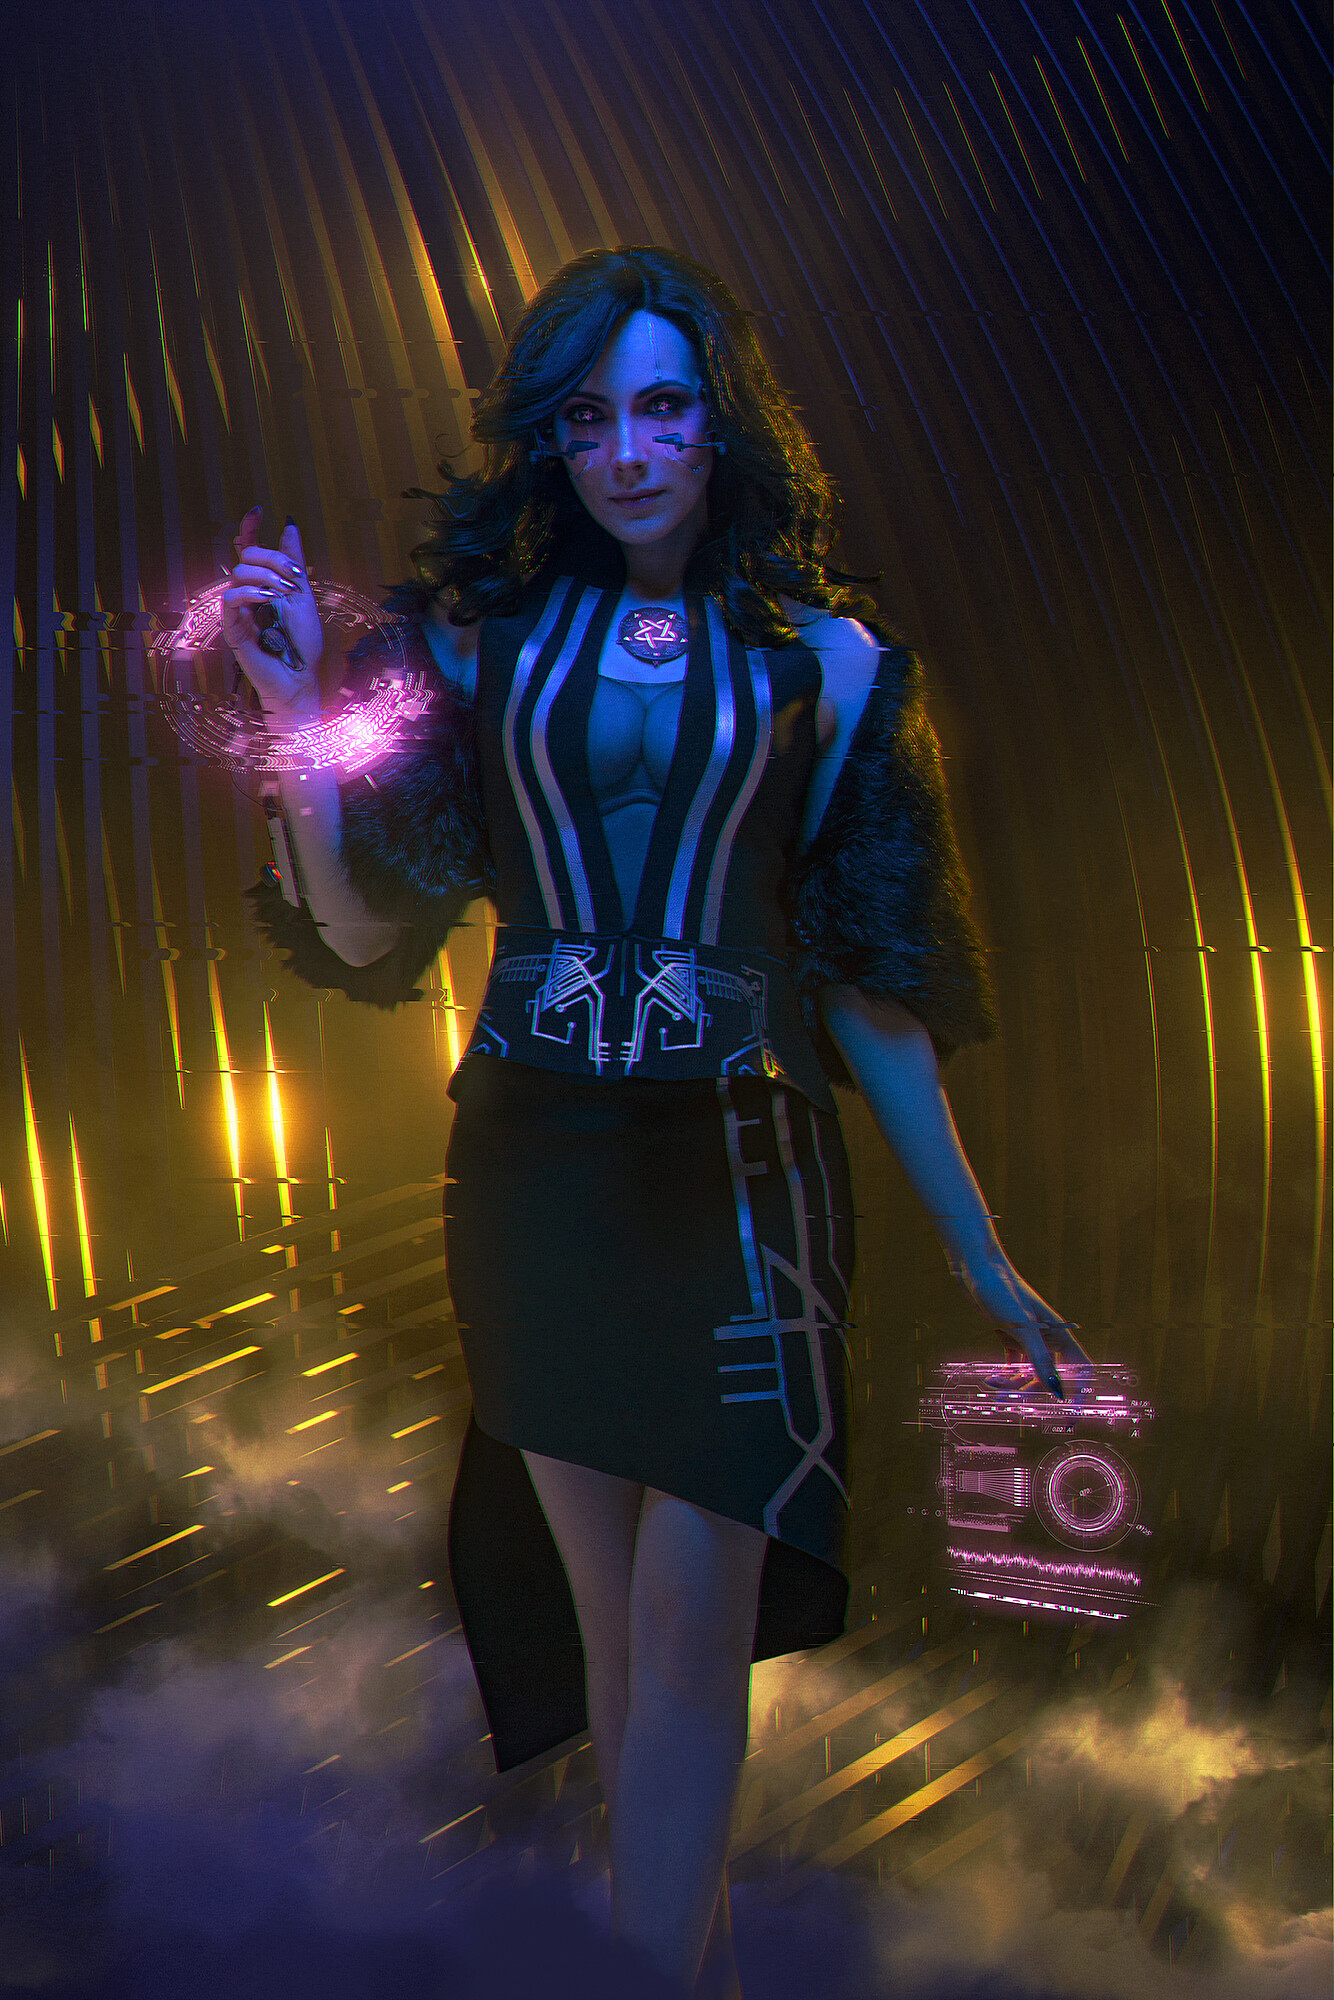 Yennefer 2077 by Aku 悪 Sex Images Hq